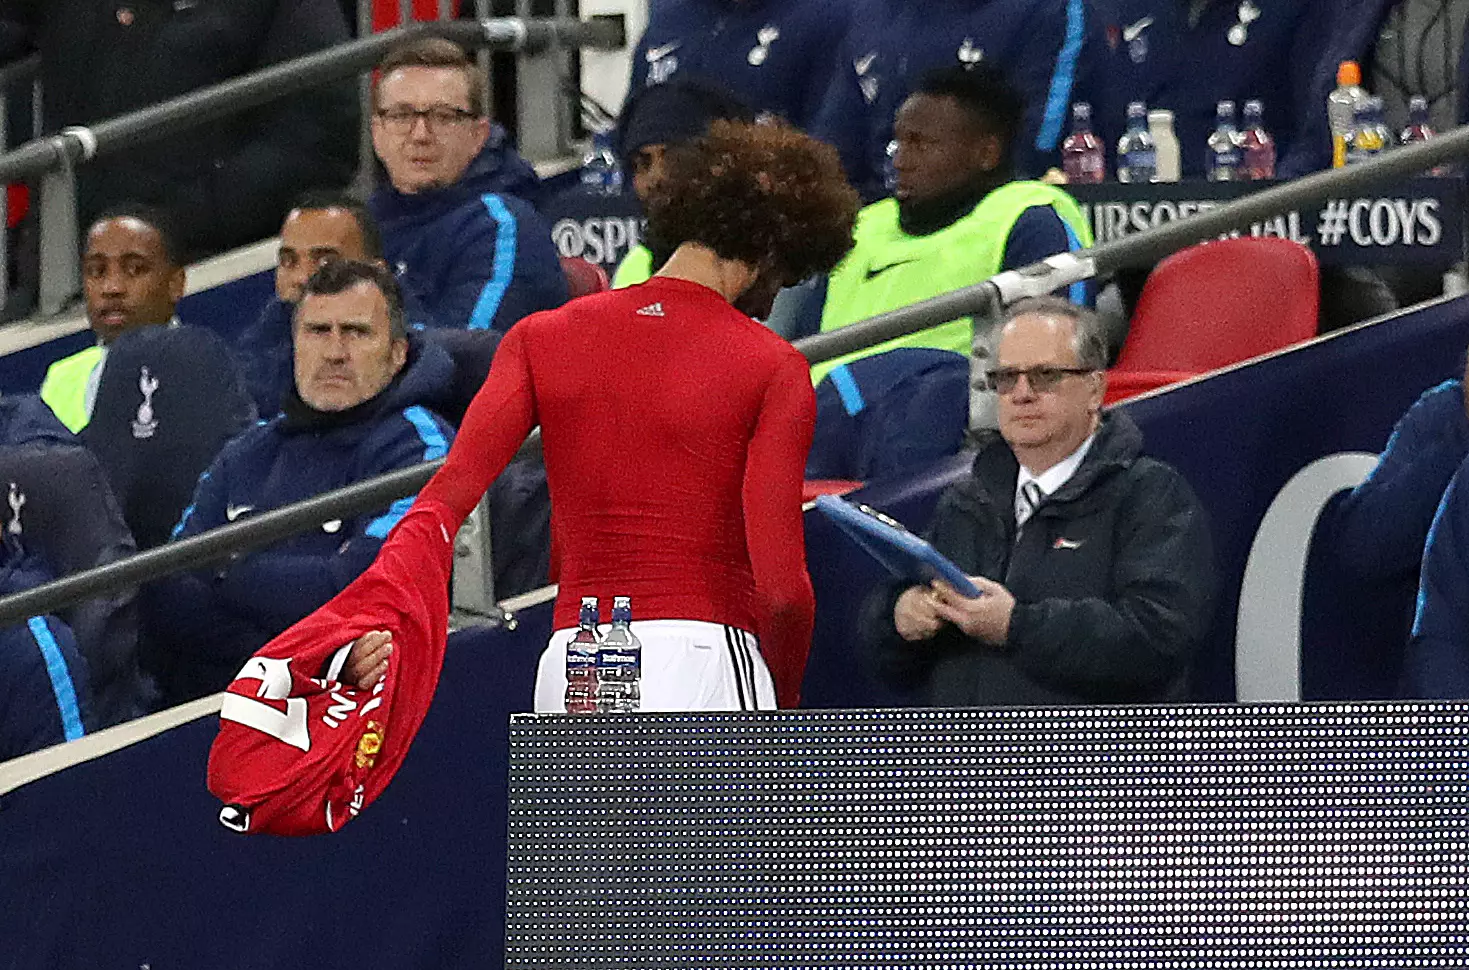 Fellaini heads down the tunnel after suffering an injury. Image: PA